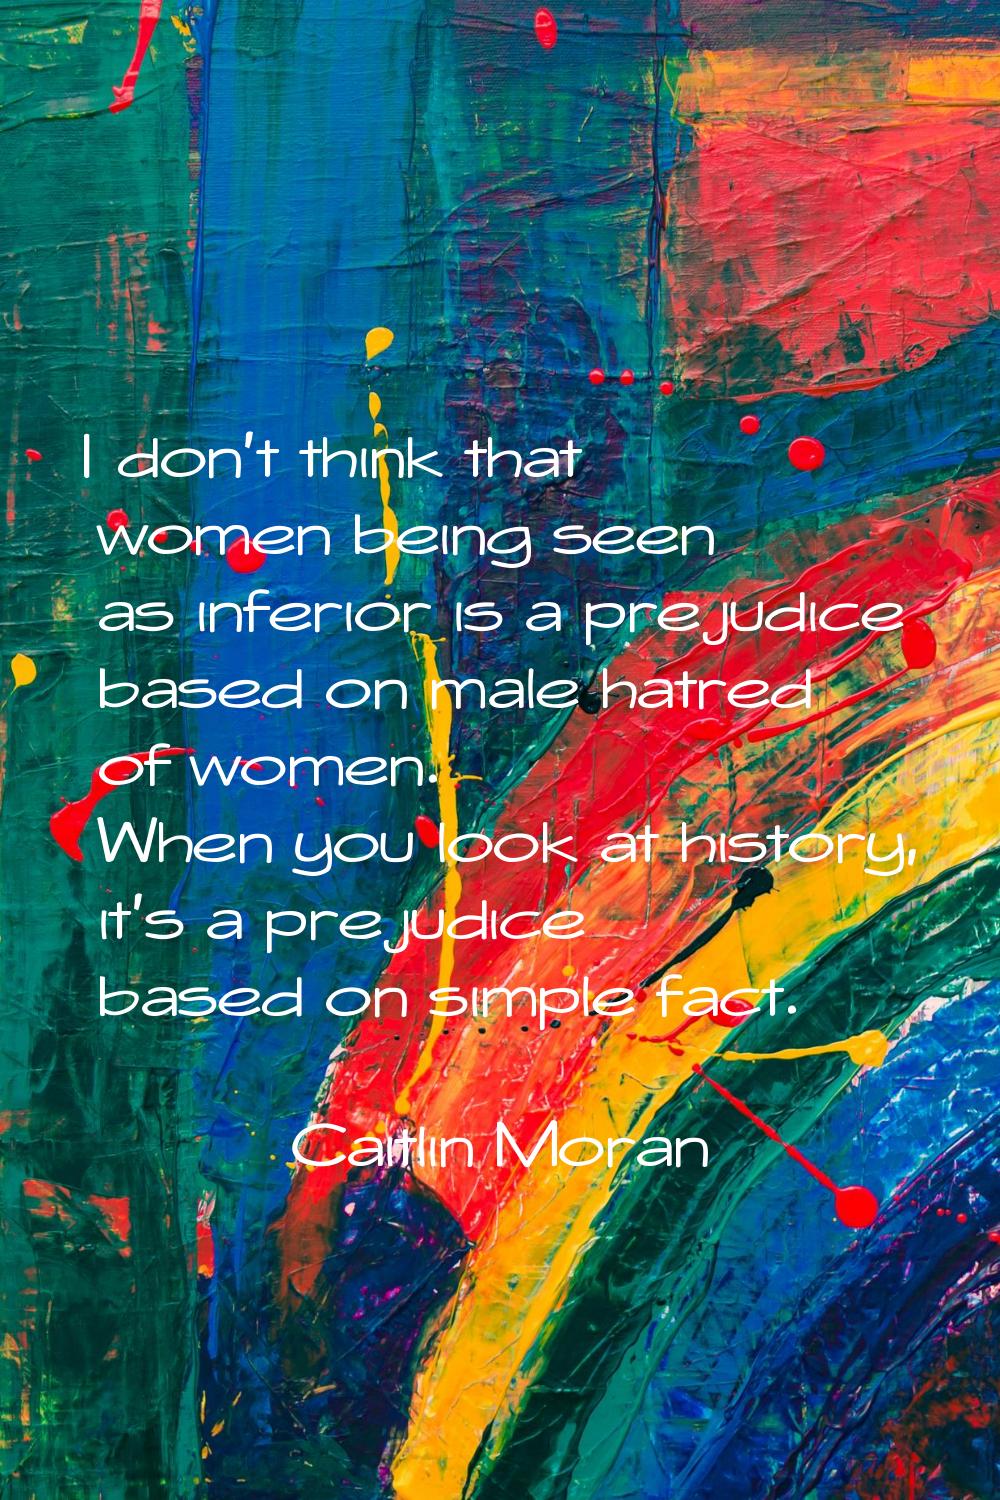 I don't think that women being seen as inferior is a prejudice based on male hatred of women. When 